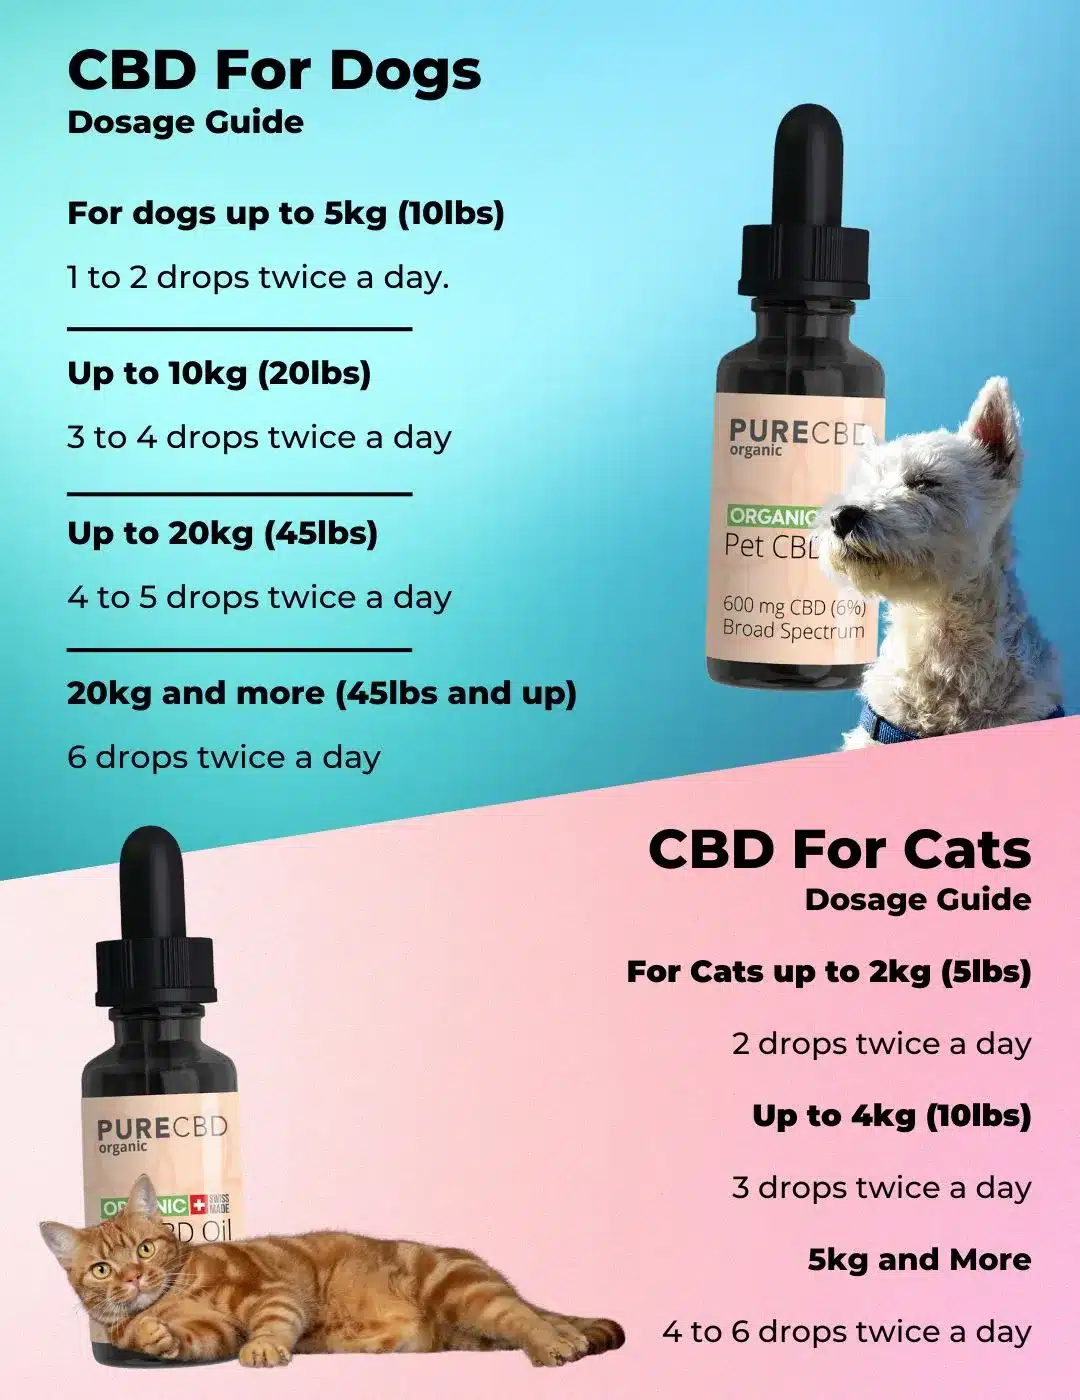 This is a dosing chart for CBD oil for pets based on our experience with hundreds of pet owners who have used our products. The correct dosage for dogs is 1 to 2 drops of CBD for up to 5kg of weight. 3 to 4 drops for up to 10kg. 4 to 5 drops for up to 20kg and 6 drops twice a day for more than 20 kgs. For cats, it is 2 drops a day for up to 2kgs. 3 drops a day for up to 4kgs and 4 to 6 drops a day for cats over 5kg.